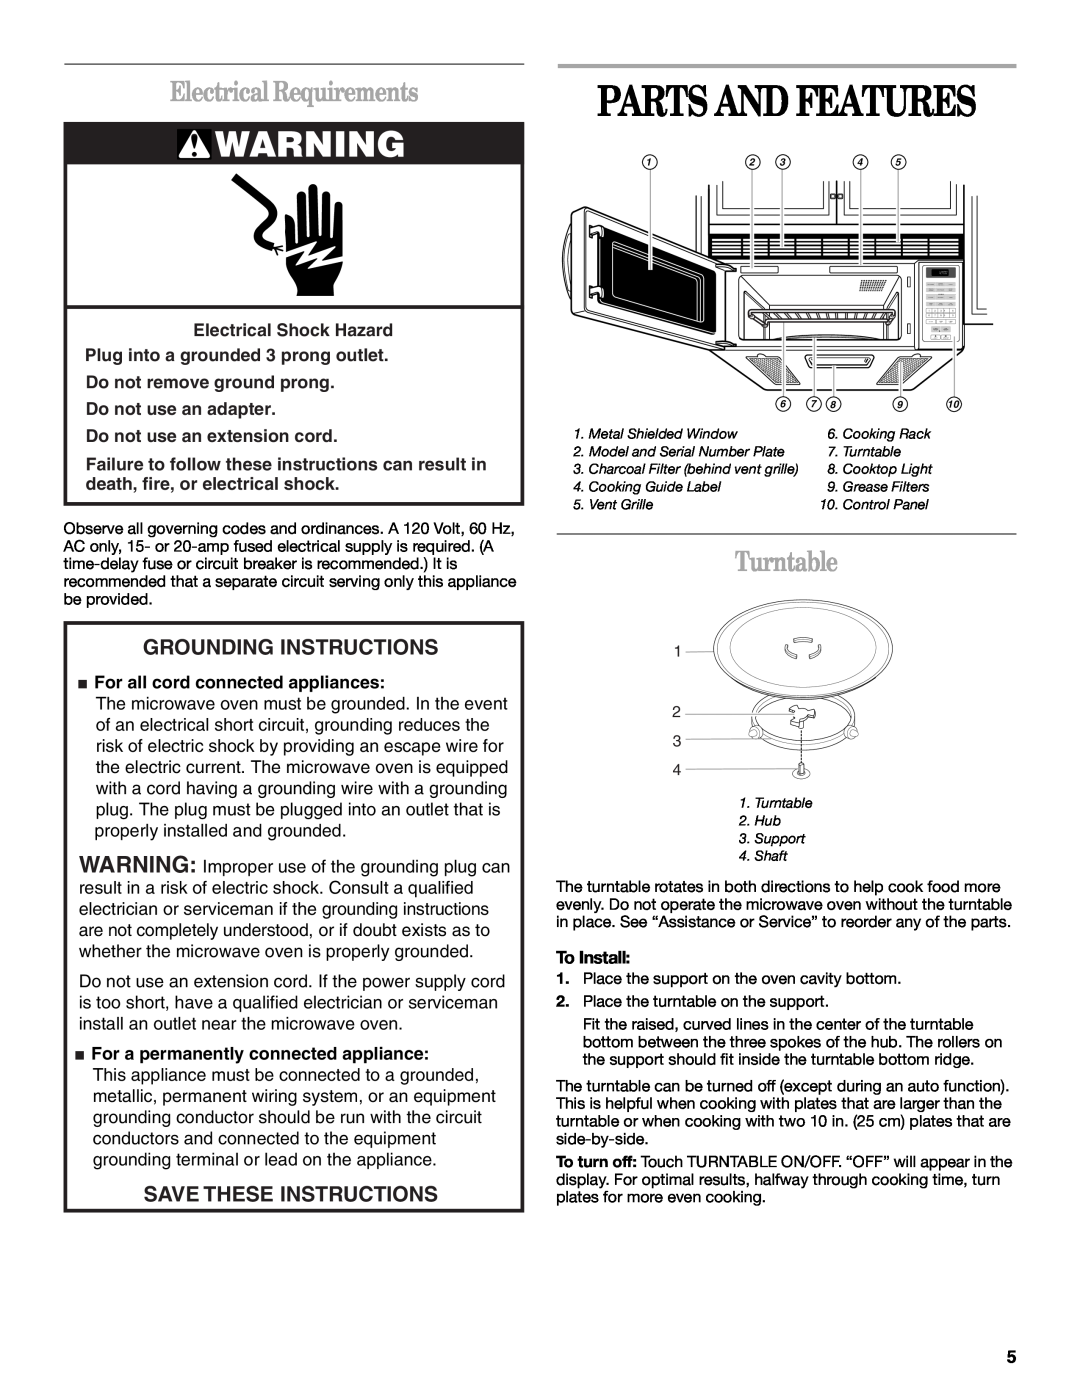 Whirlpool MH6150XM Parts And Features, Electrical Requirements, Turntable, Grounding Instructions, Save These Instructions 